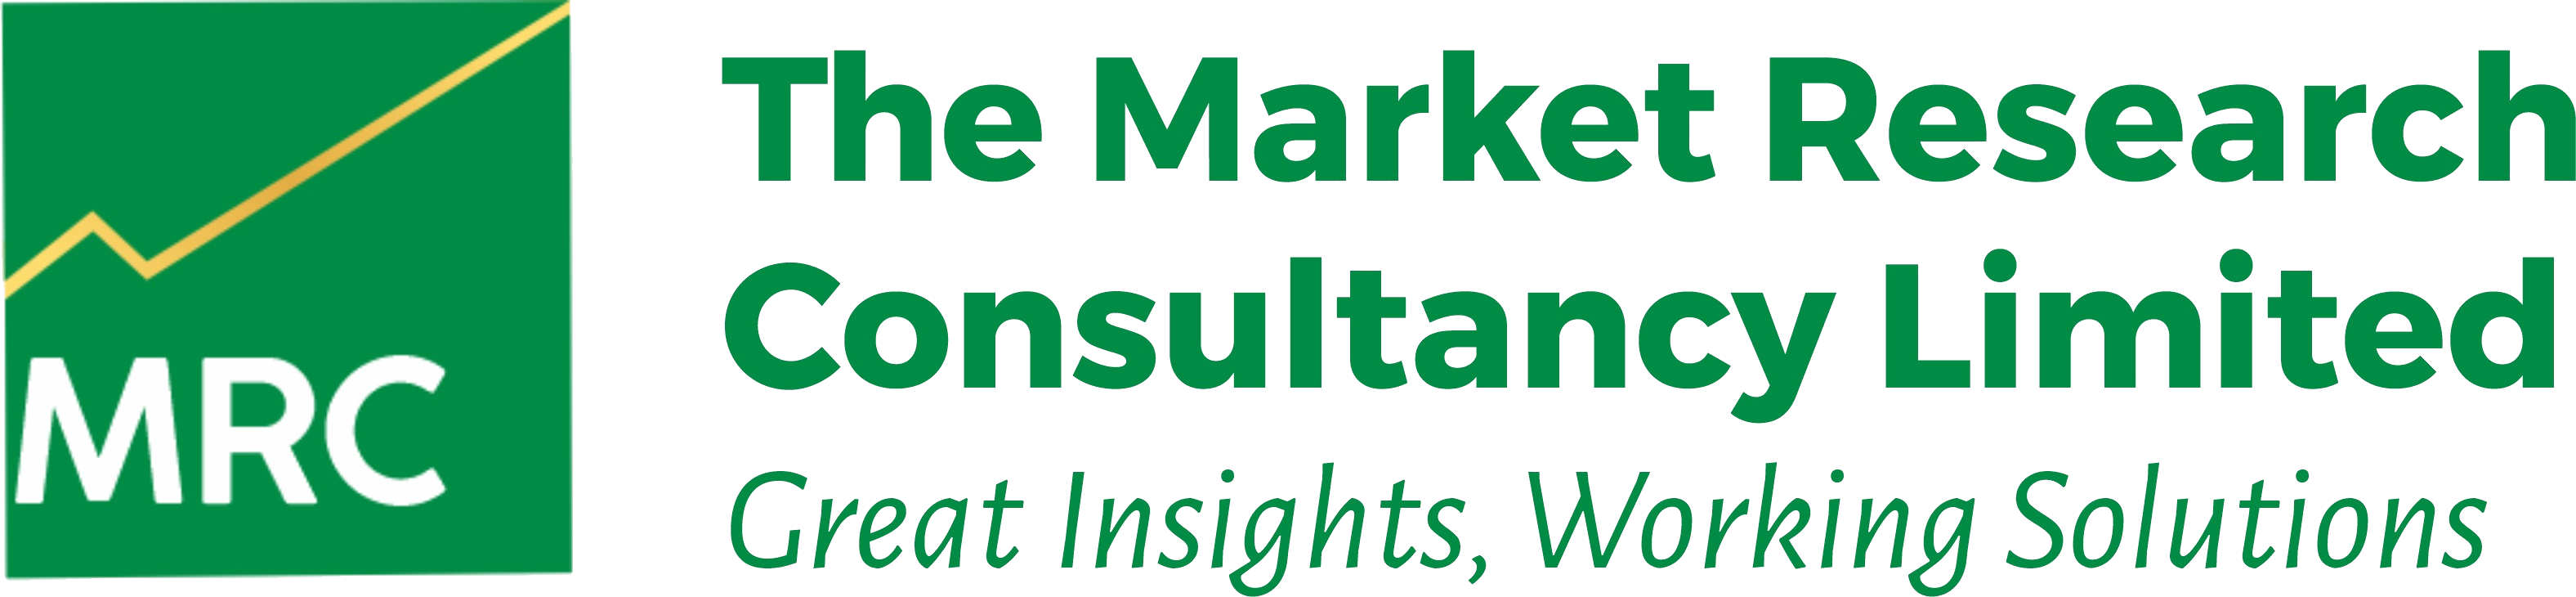 The Market Research Consultancy Limited